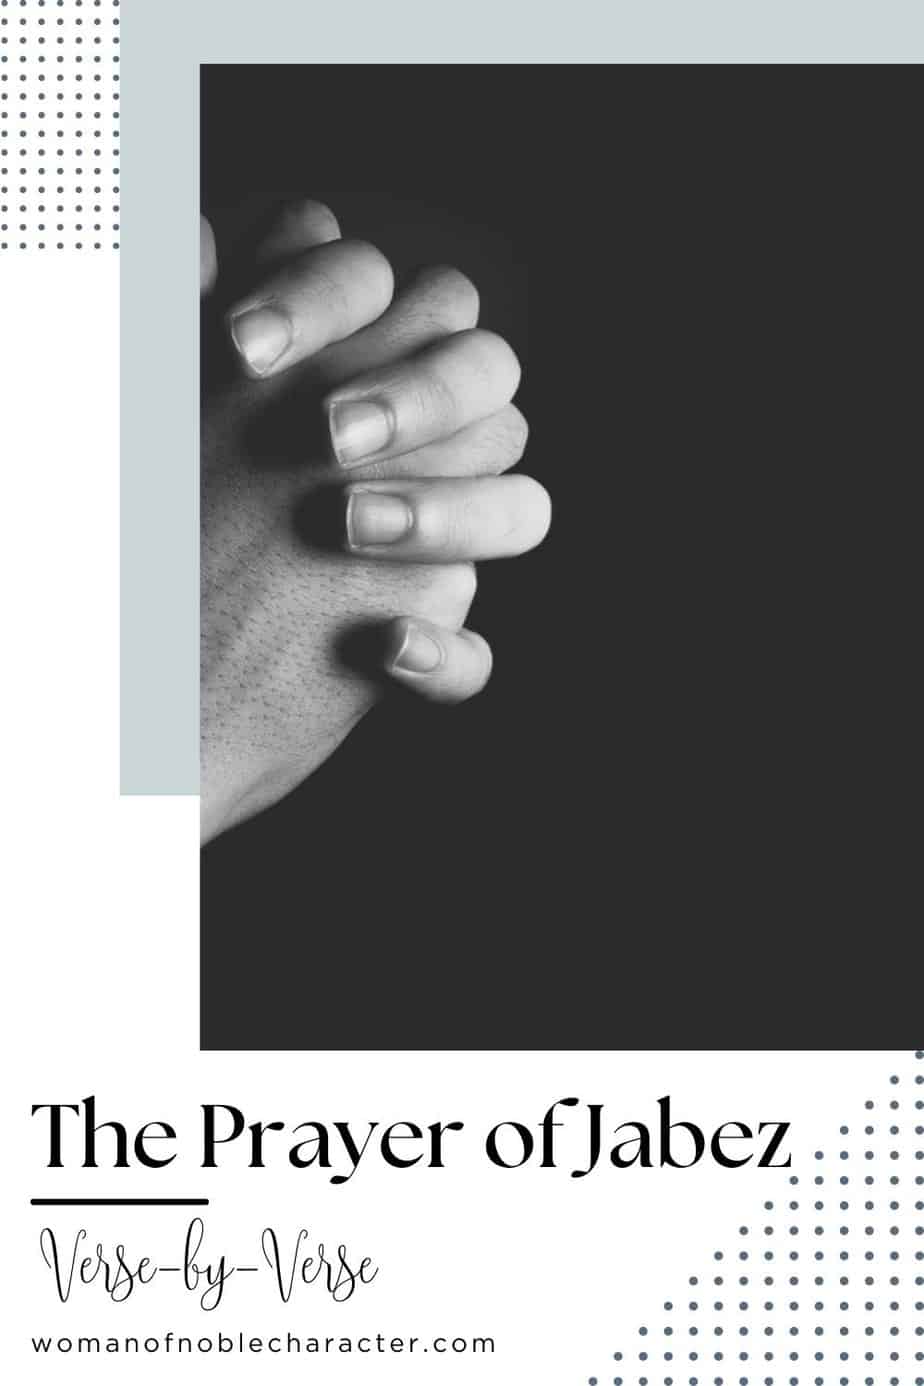 image of man's hands folded in prayer with text The Prayer of Jabez Verse-by-Verse & Praying This Powerful Prayer